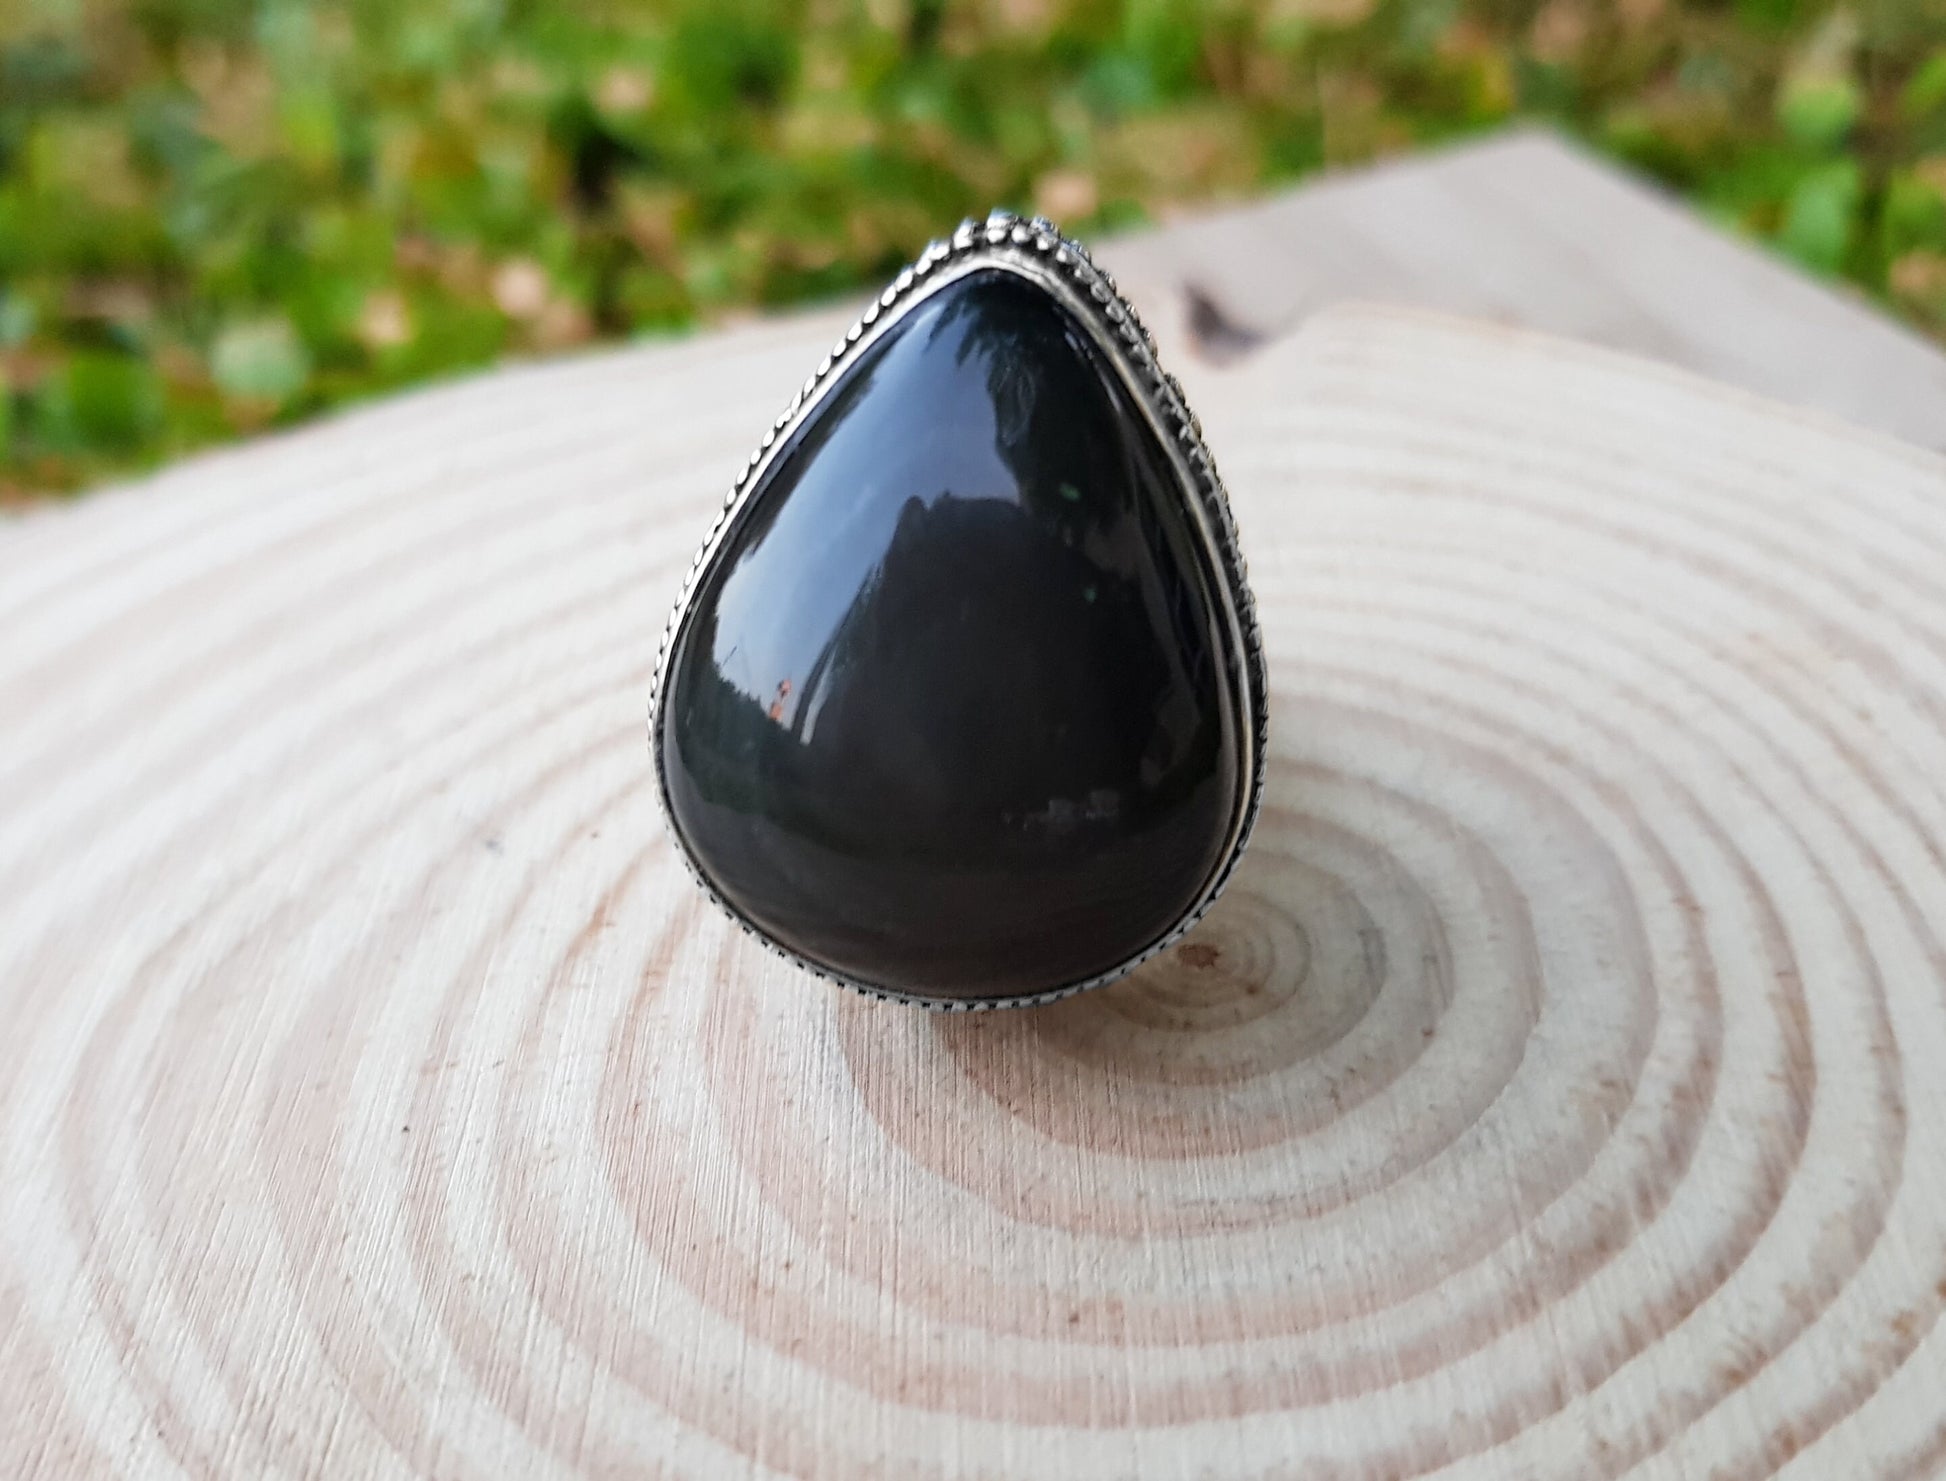 Black Onyx Statement Ring In Sterling Silver Size US 7 1/2 Gothic Boho Ring Unique Gift For Women